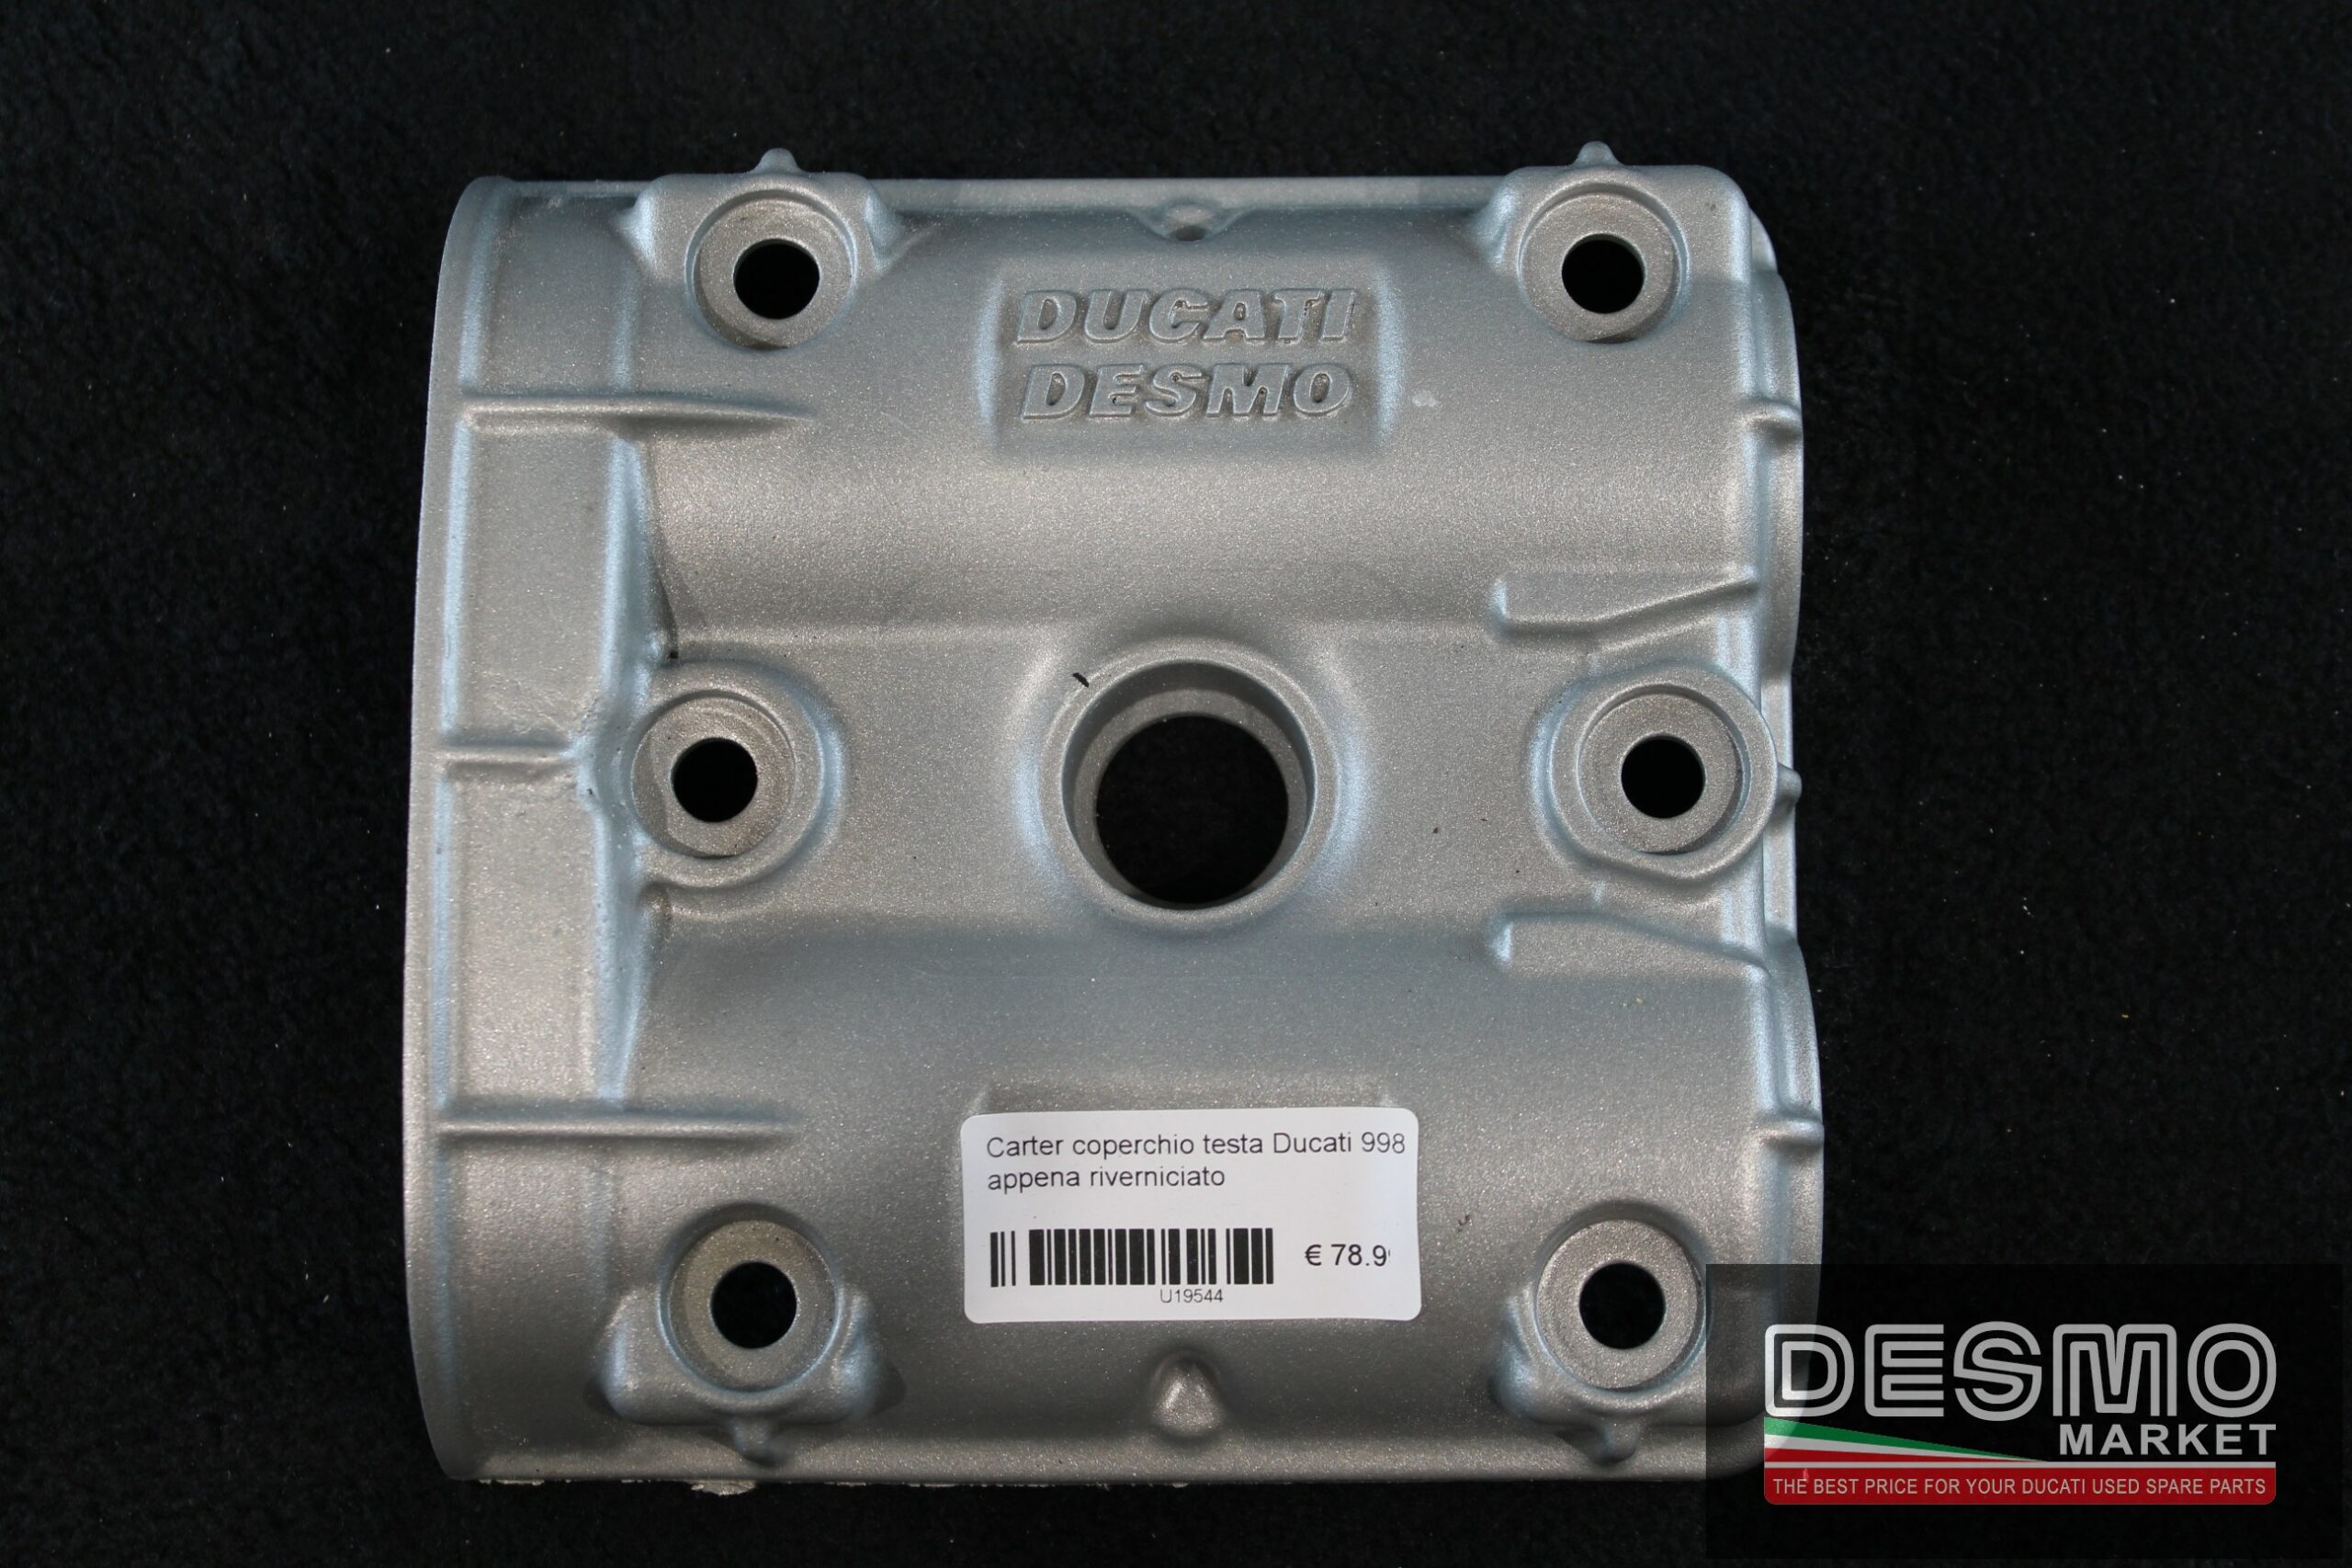 Spare parts for new and used Ducati motorcycles | Desmo Market